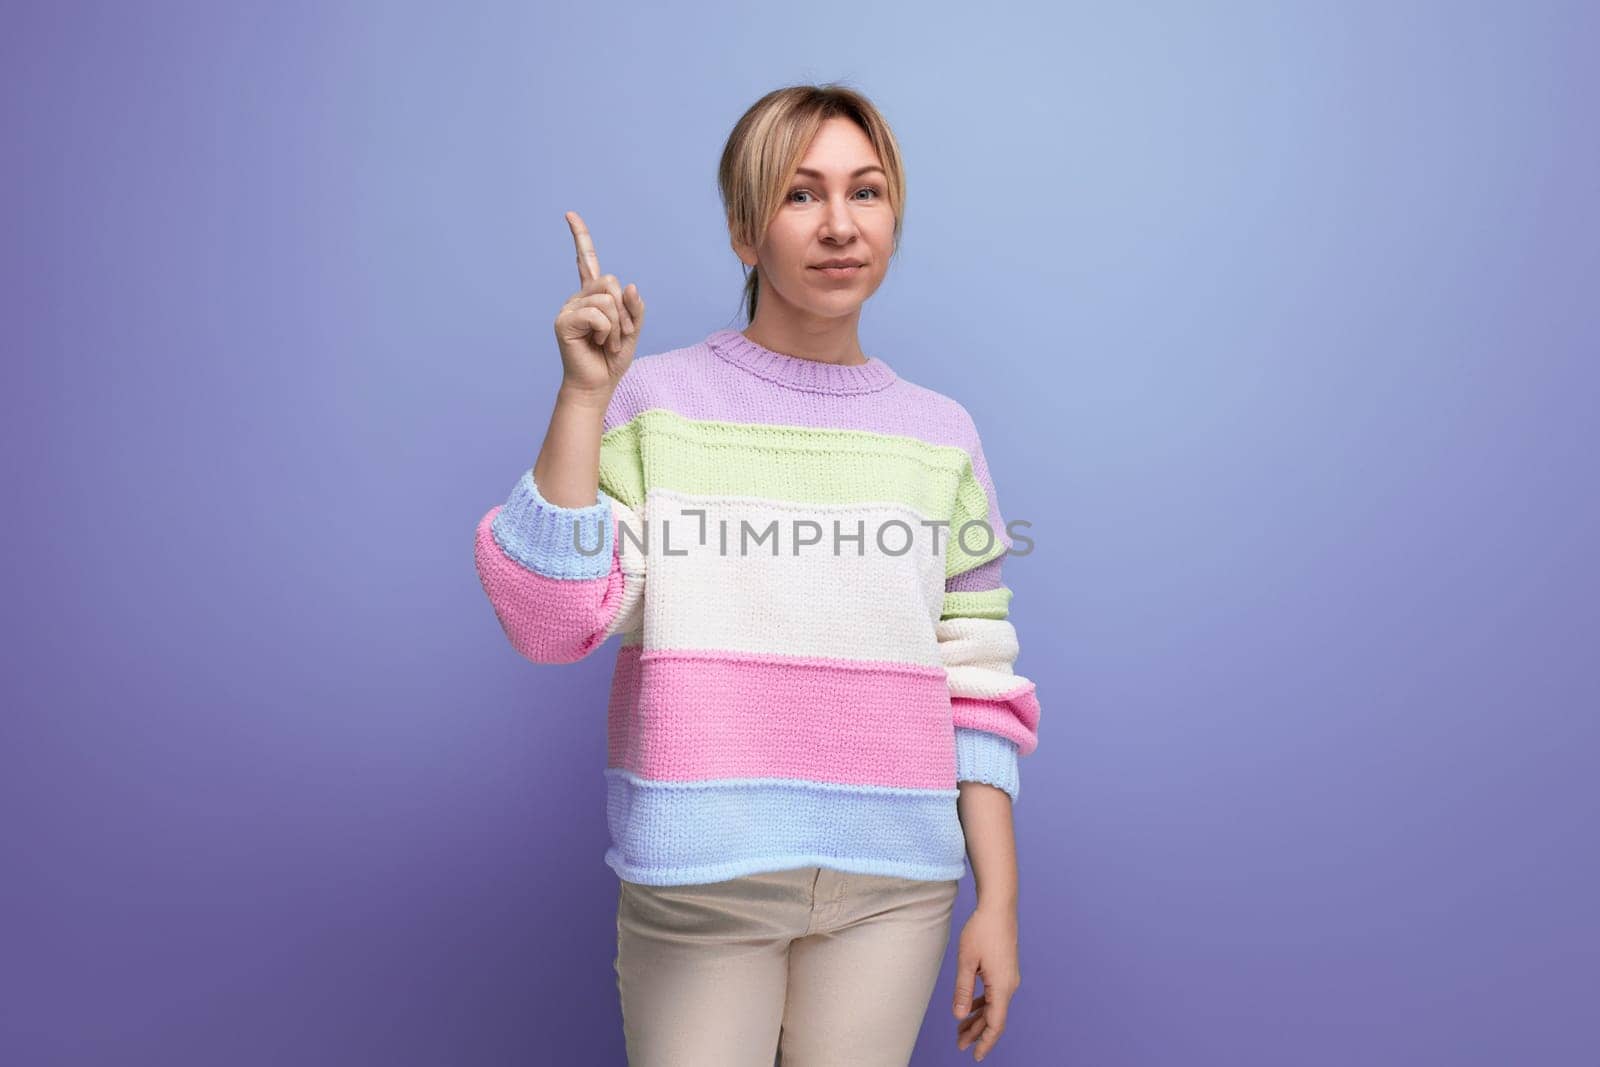 blond brilliant young woman in casual outfit with a good idea on a purple background with copy space.